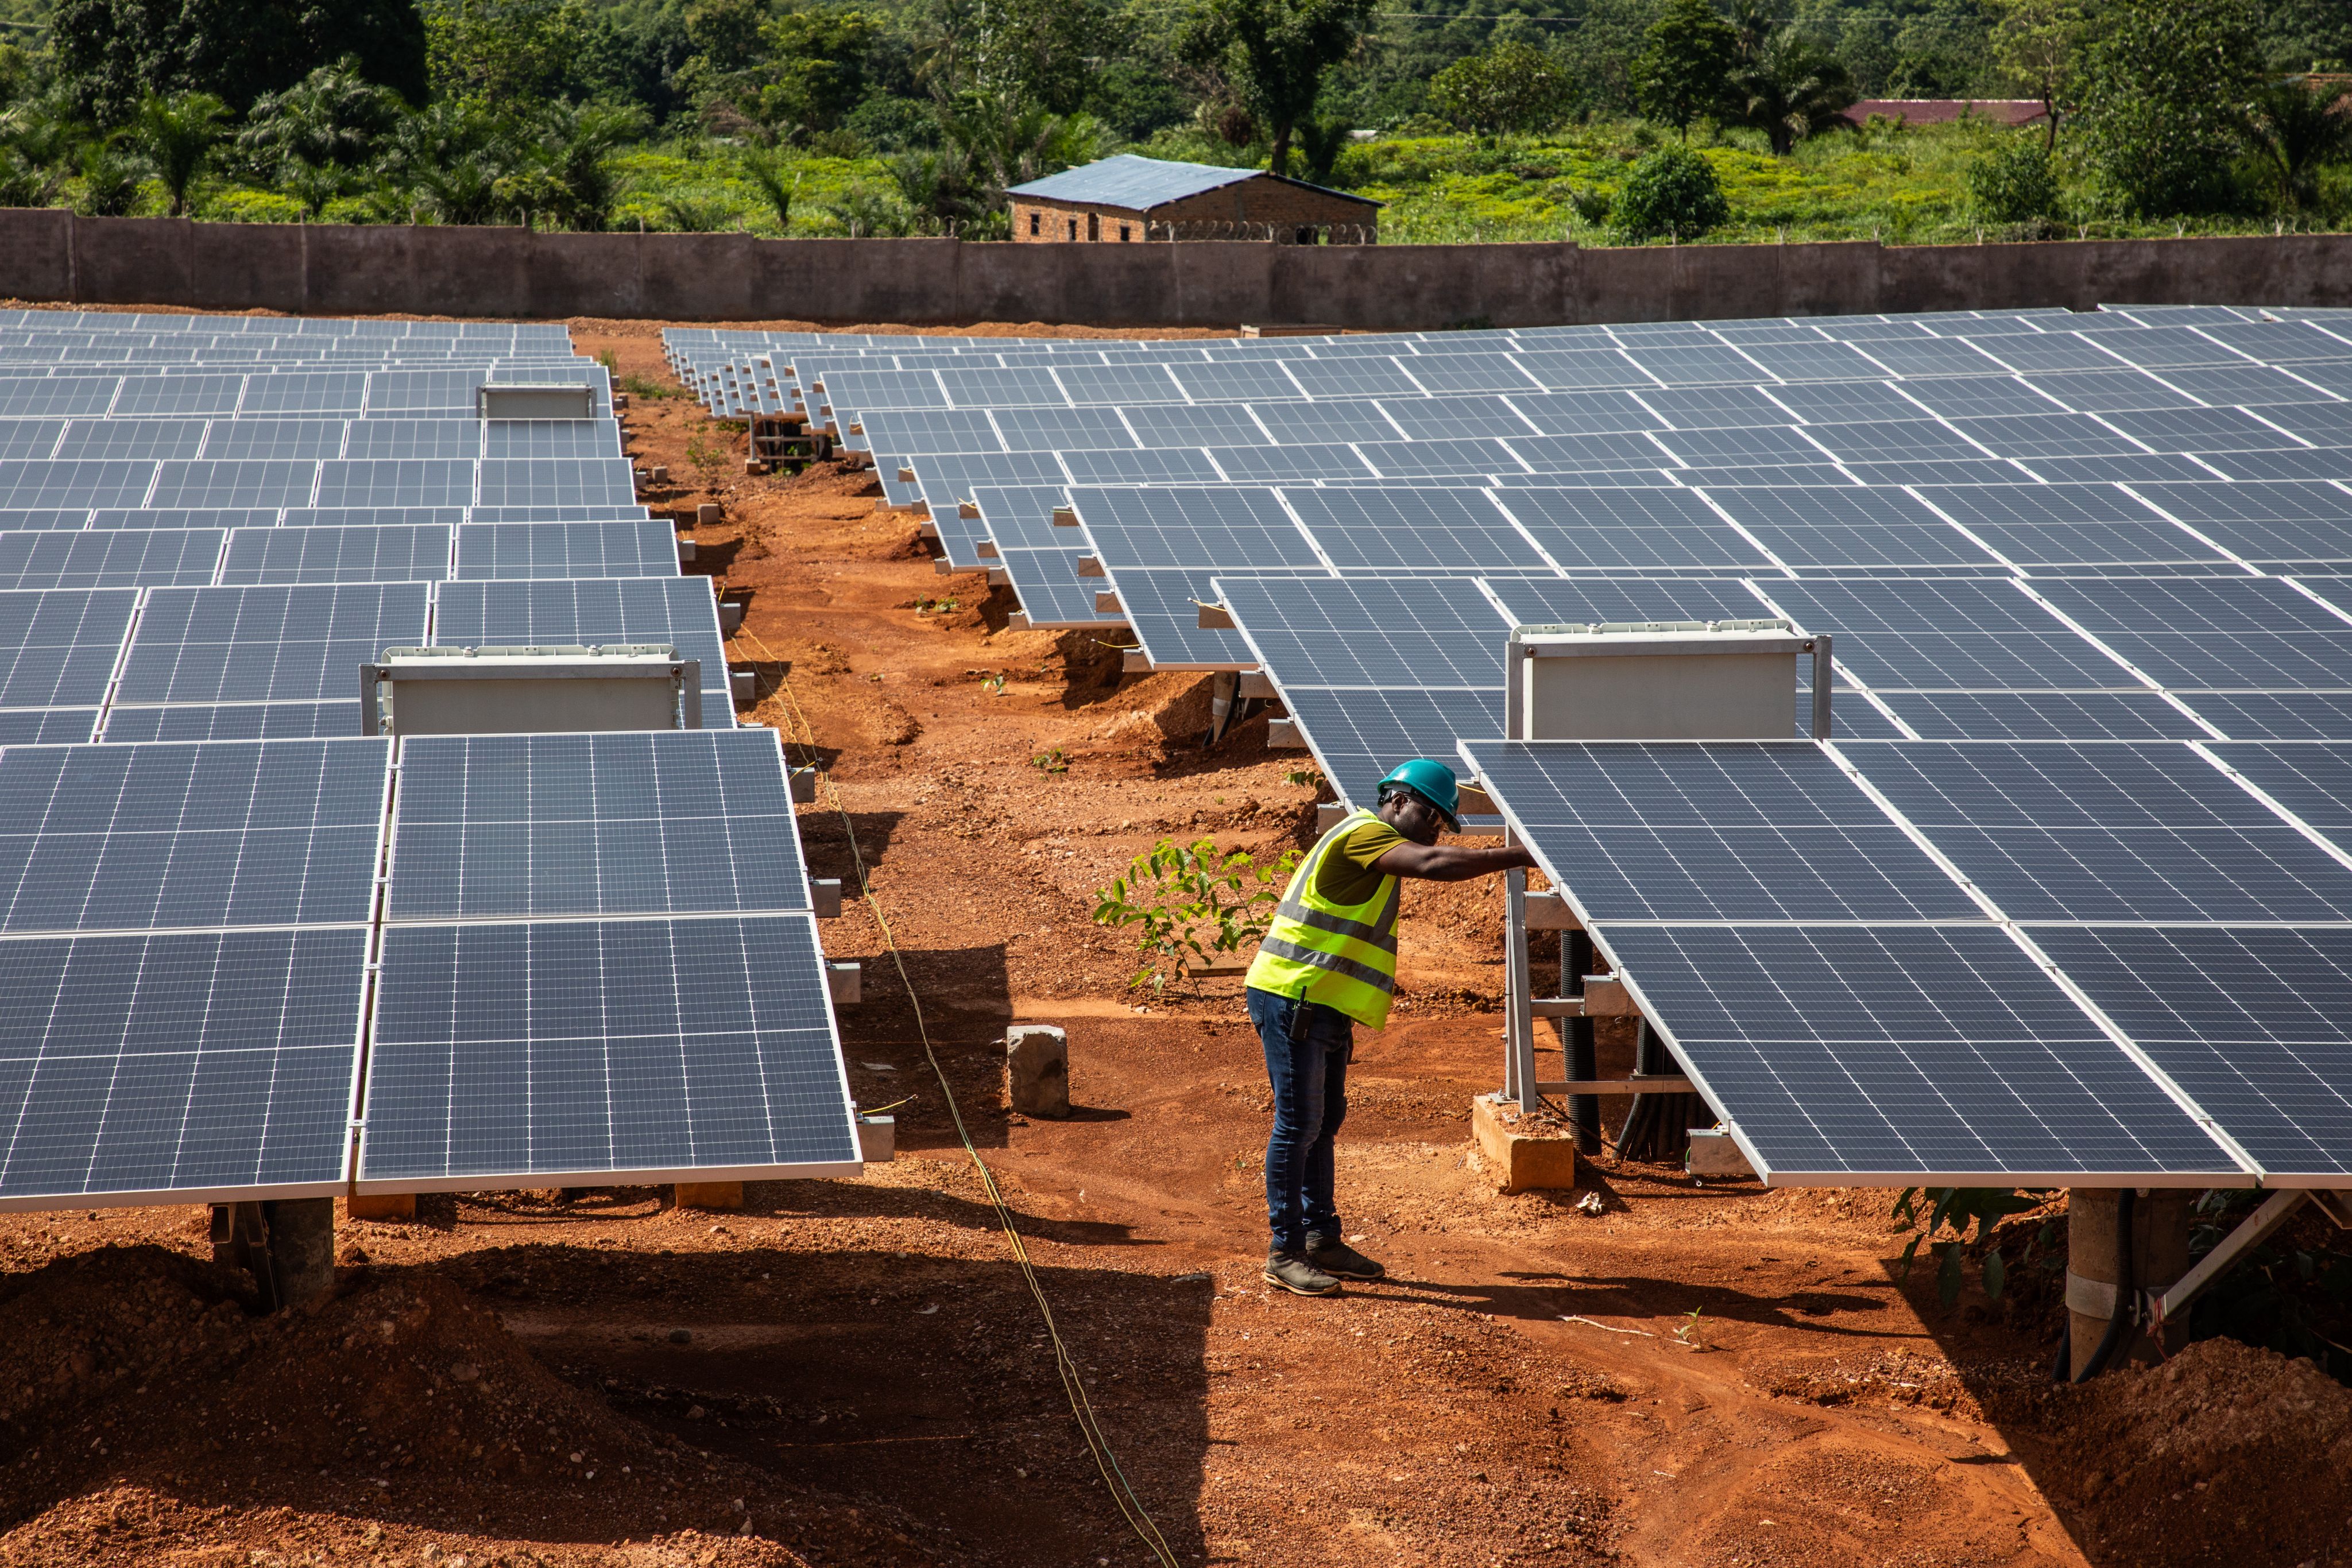 Worker inspects a solar panel at the solar park in Bangui, Central African Republic.